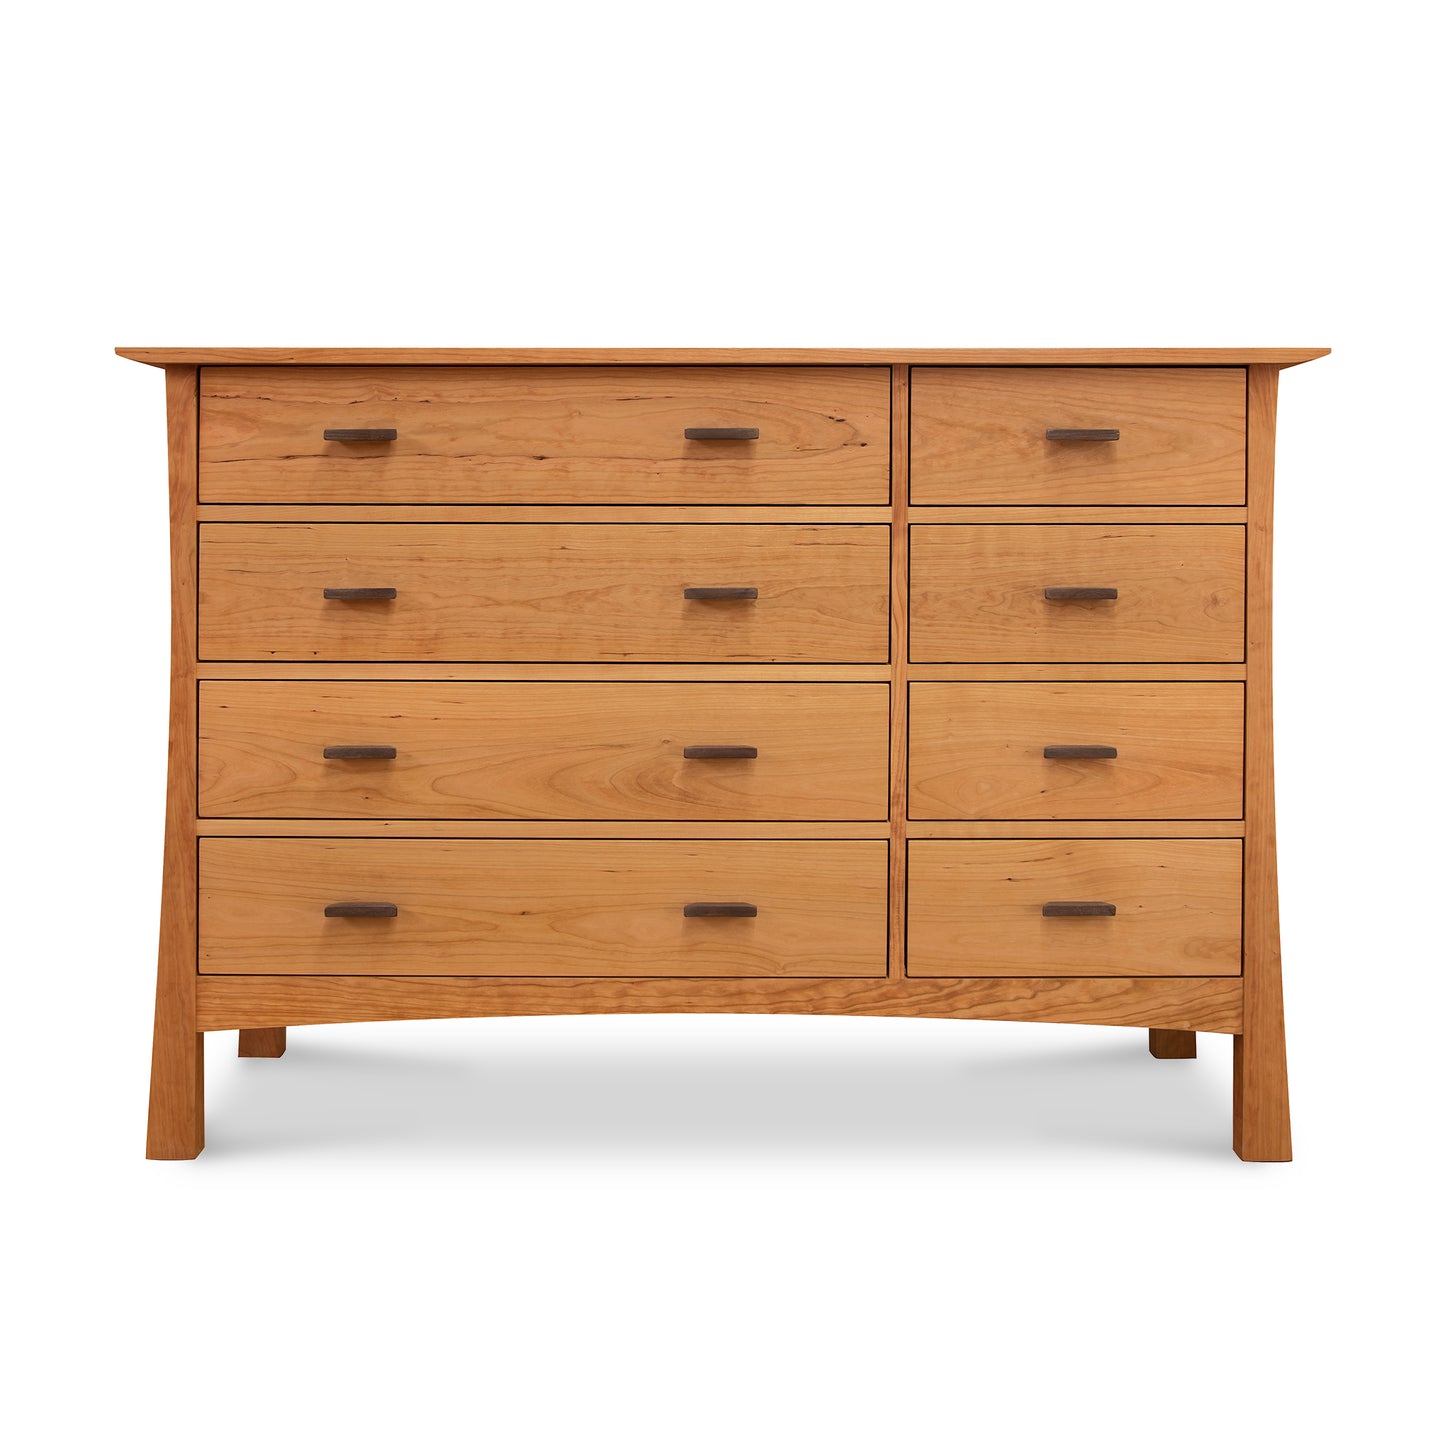 A Contemporary Craftsman 8-Drawer Dresser from Vermont Furniture Designs with multiple drawers isolated on a white background.